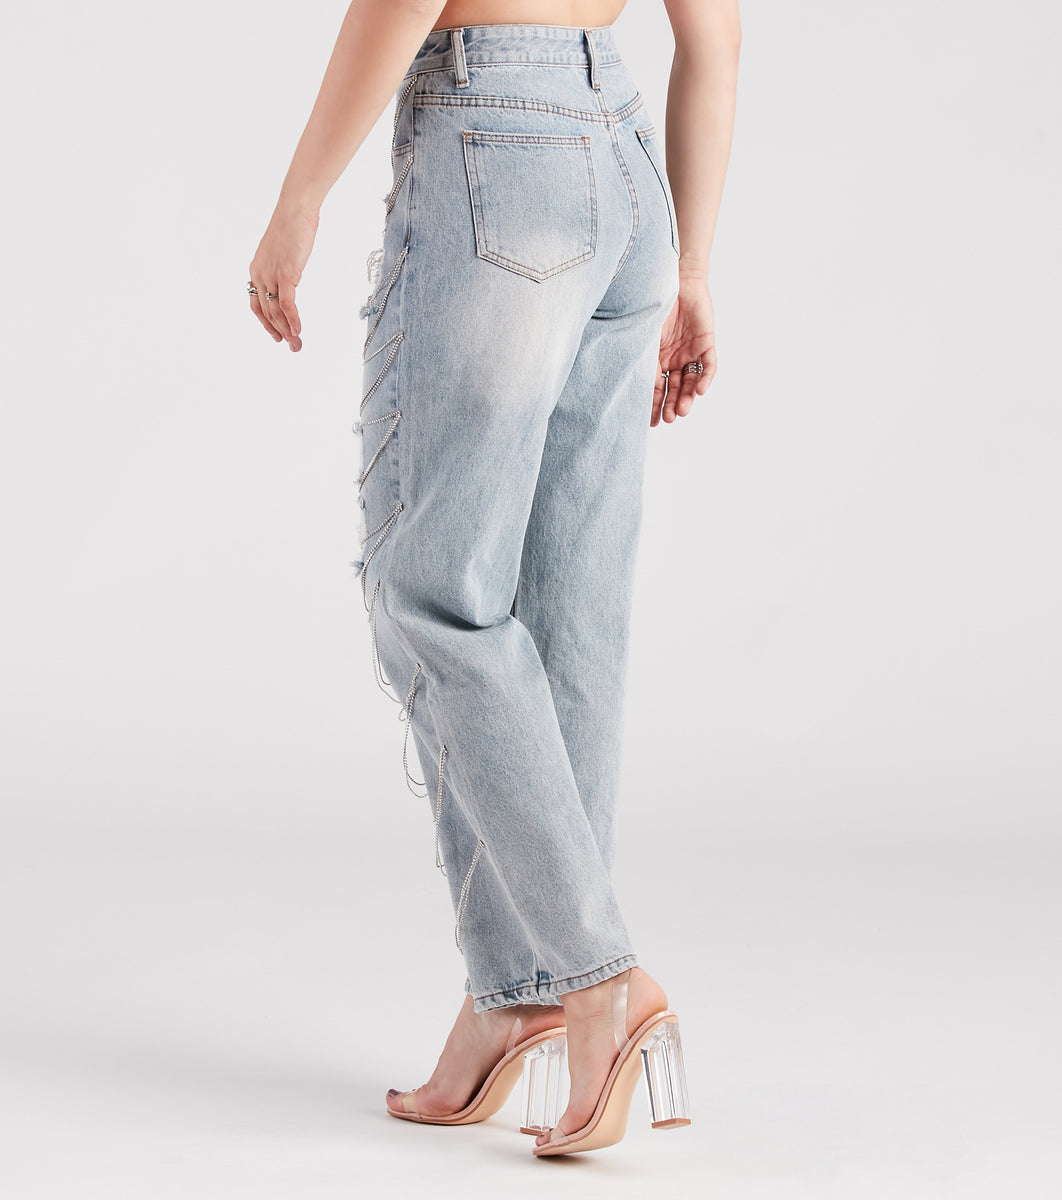 Light Wash Jeans with Rhinestone Leg Detail - Trader Rick's for